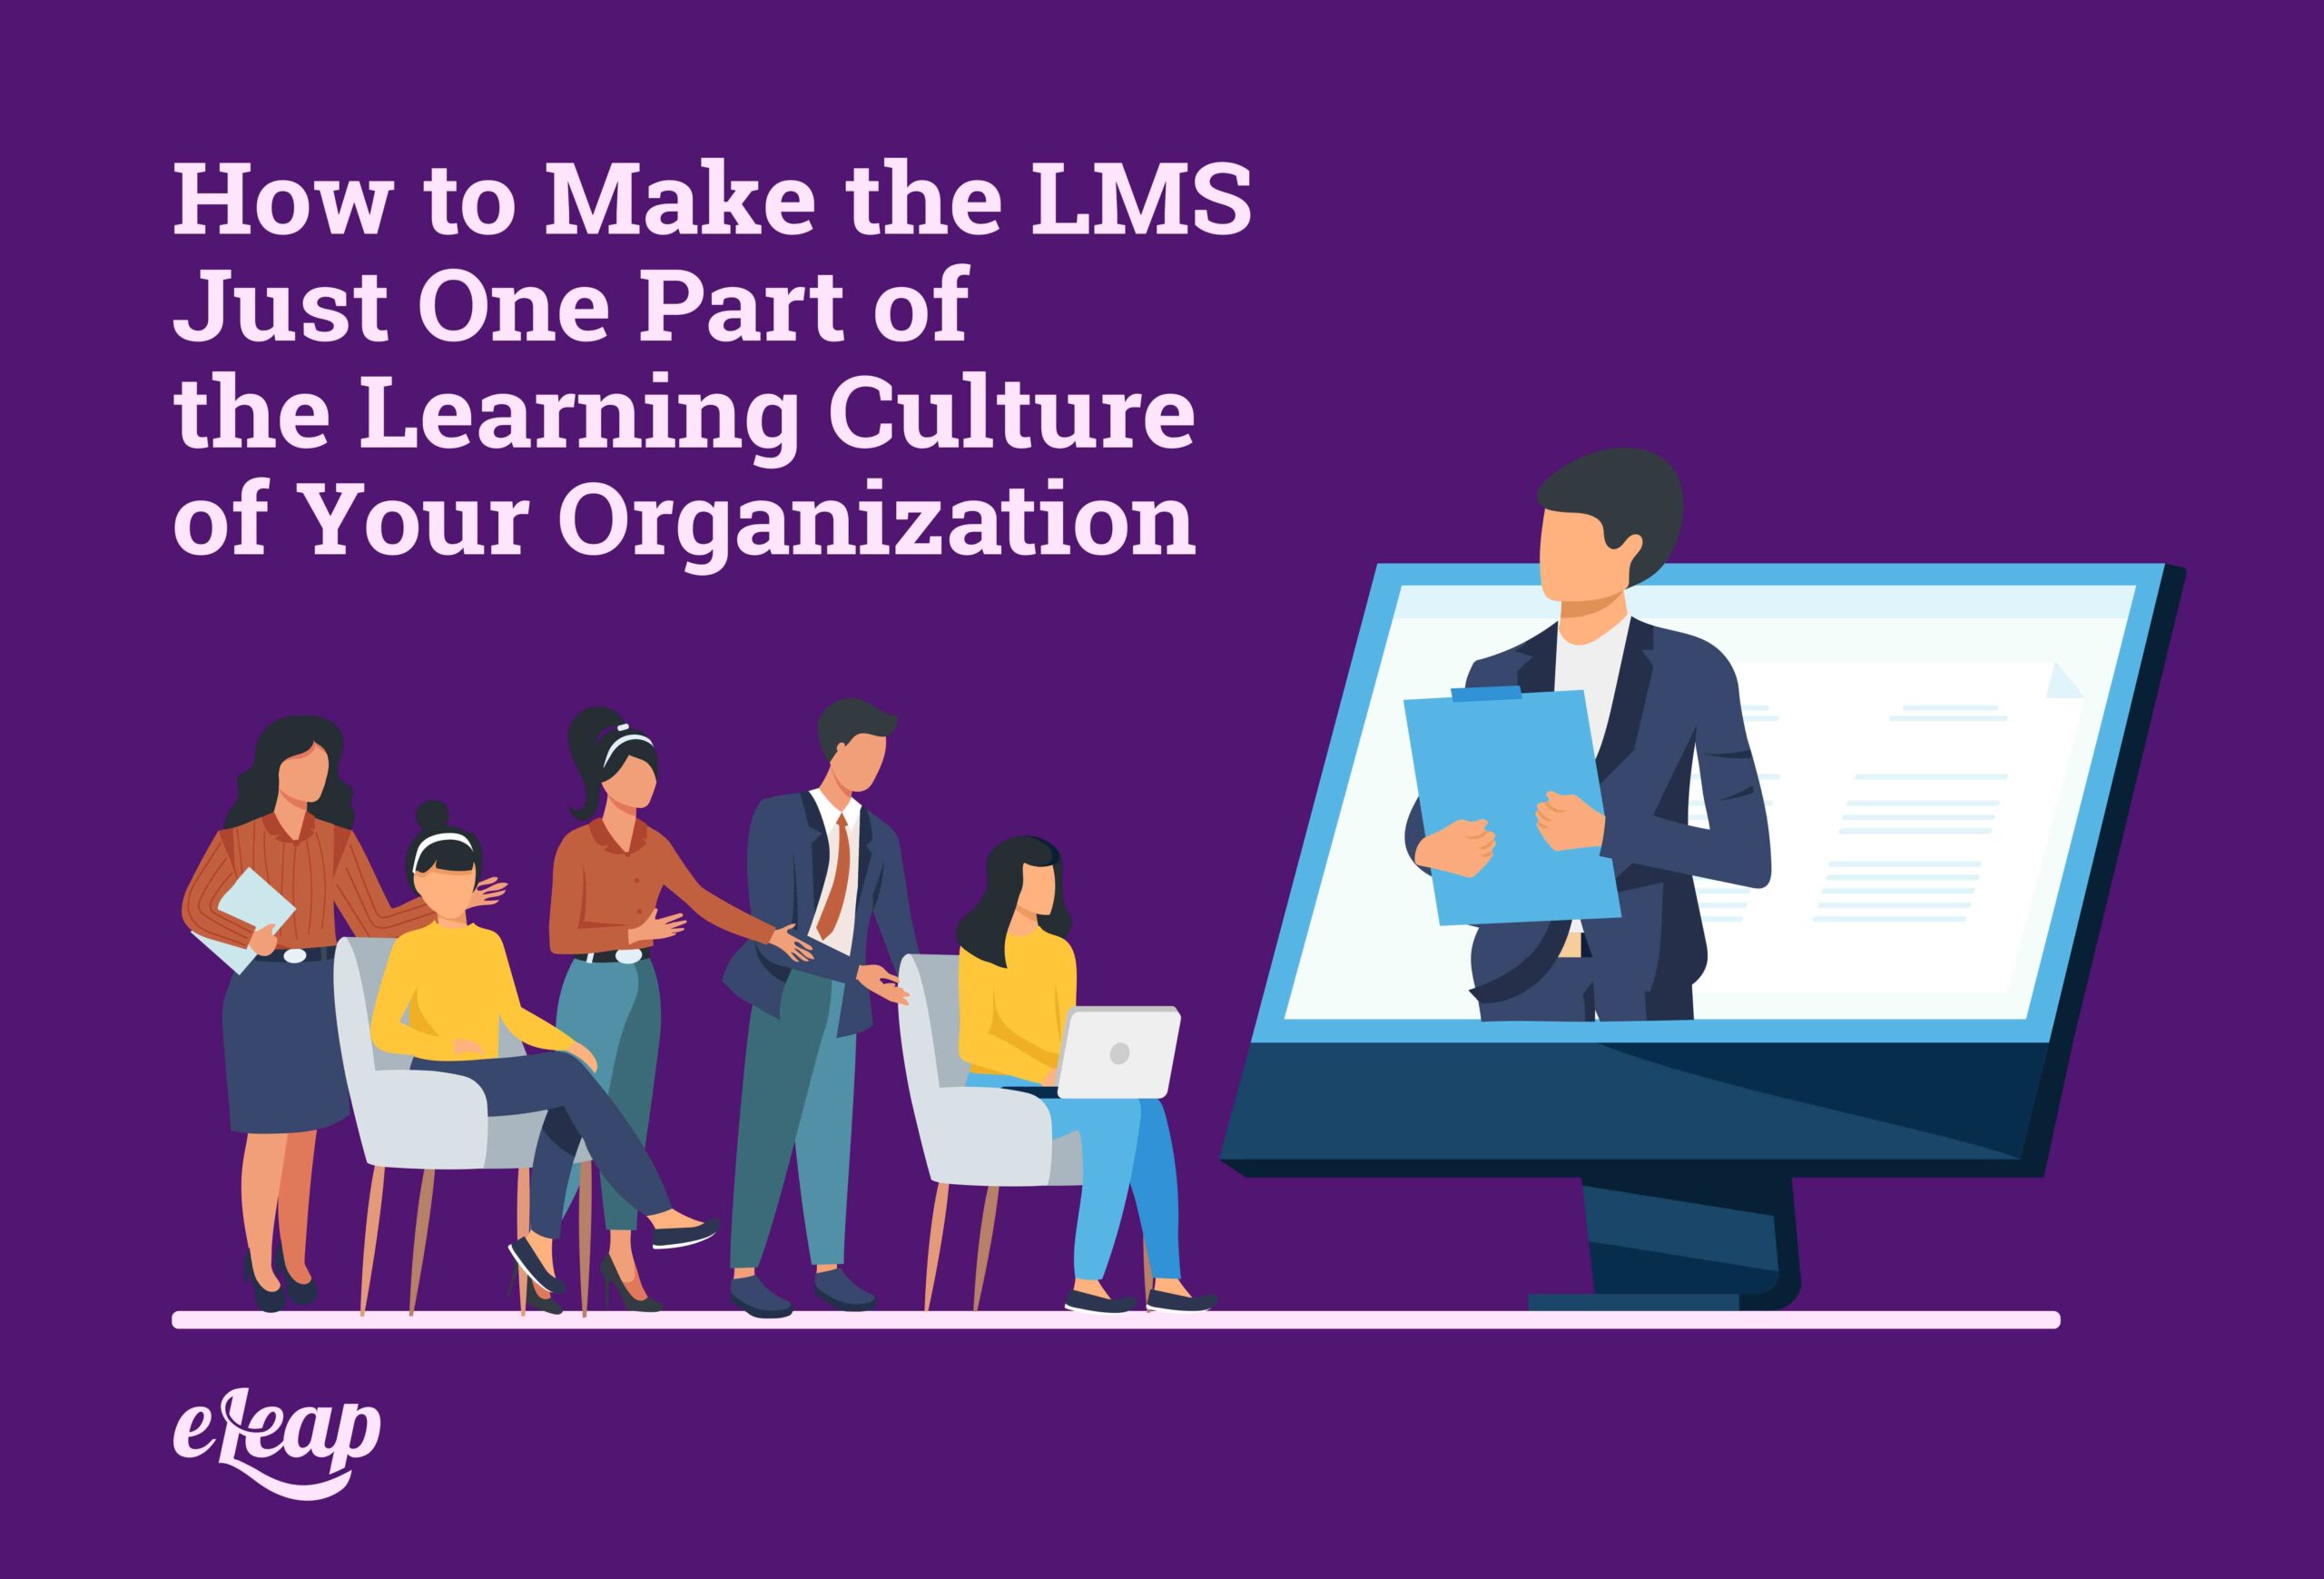 How to Make the LMS Just One Part of the Learning Culture of Your Organization